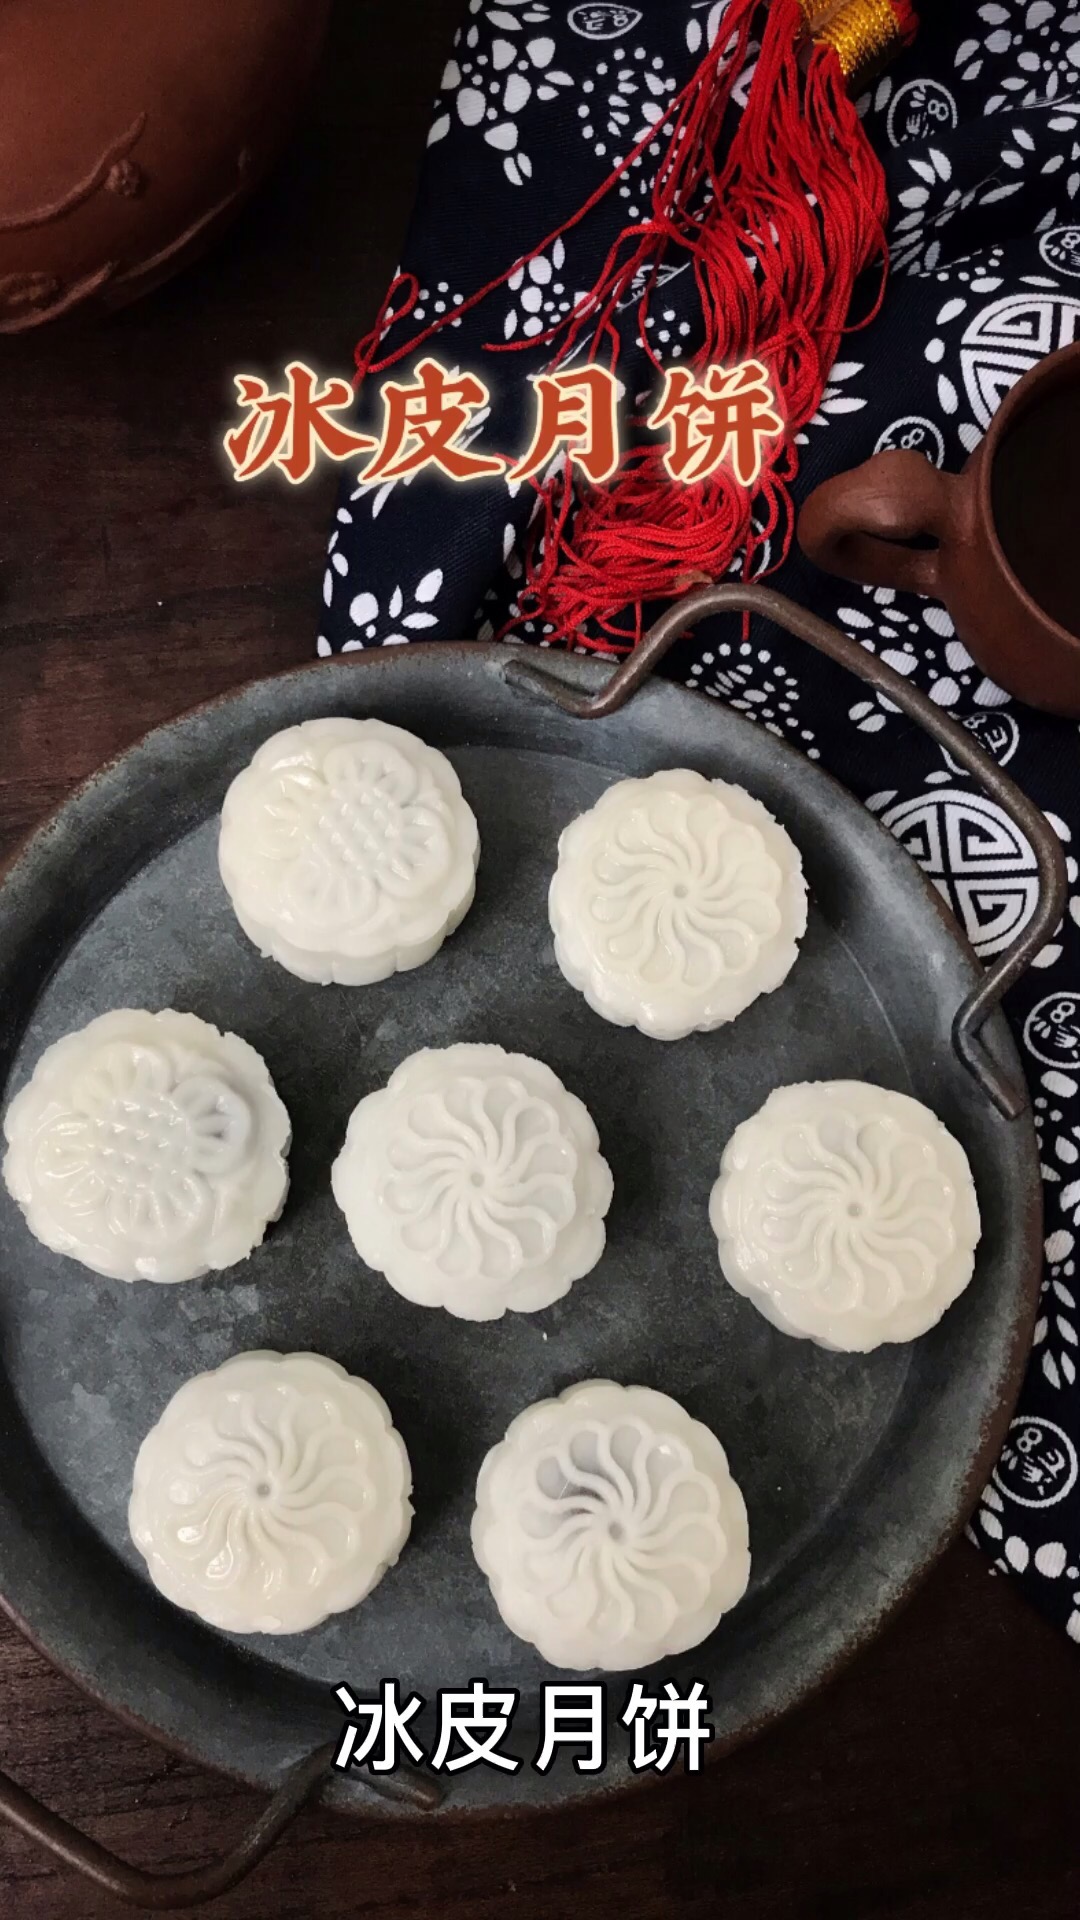 Snowy Moon Cake# The Most Beautiful But The Mid-autumn Flavour#